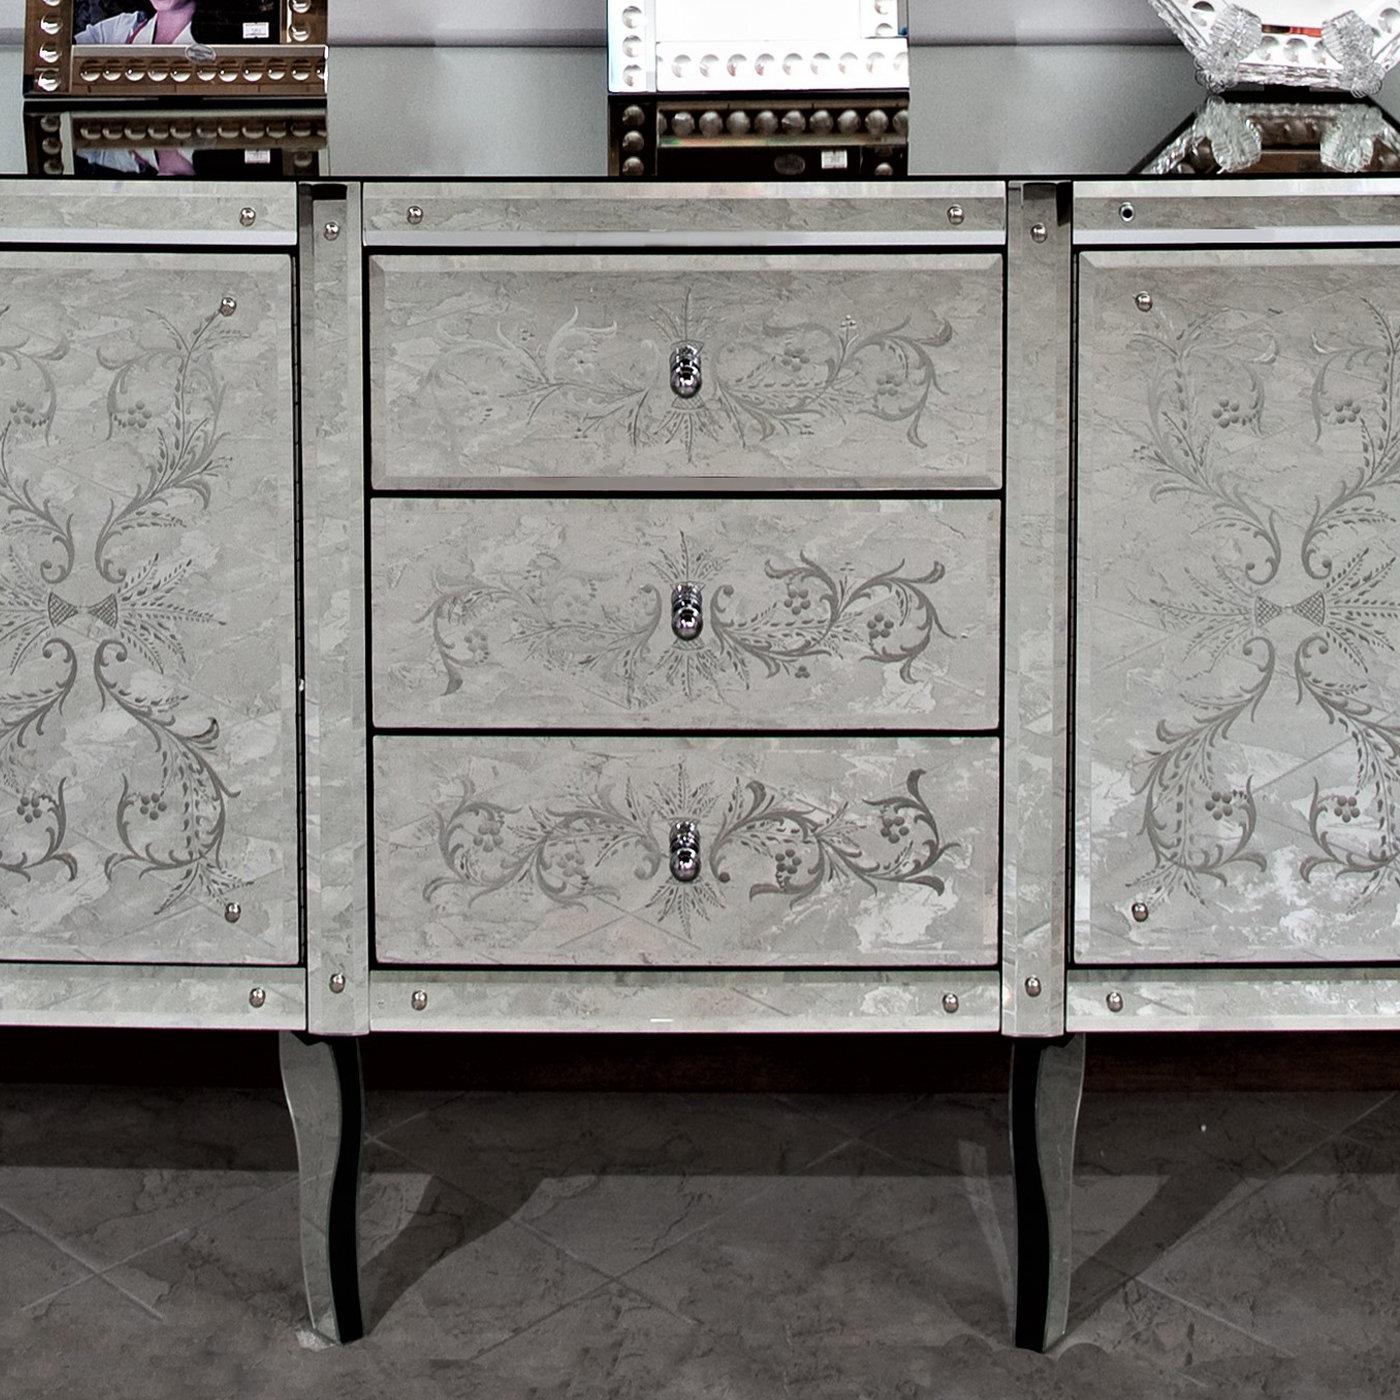 A magnificent showcase of luxe craftsmanship of Venetian style, this extraordinary sideboard will take center stage in any elegant modern interior, imbuing it with a dramatic flair. Superbly handcrafted of Murano glass following traditional